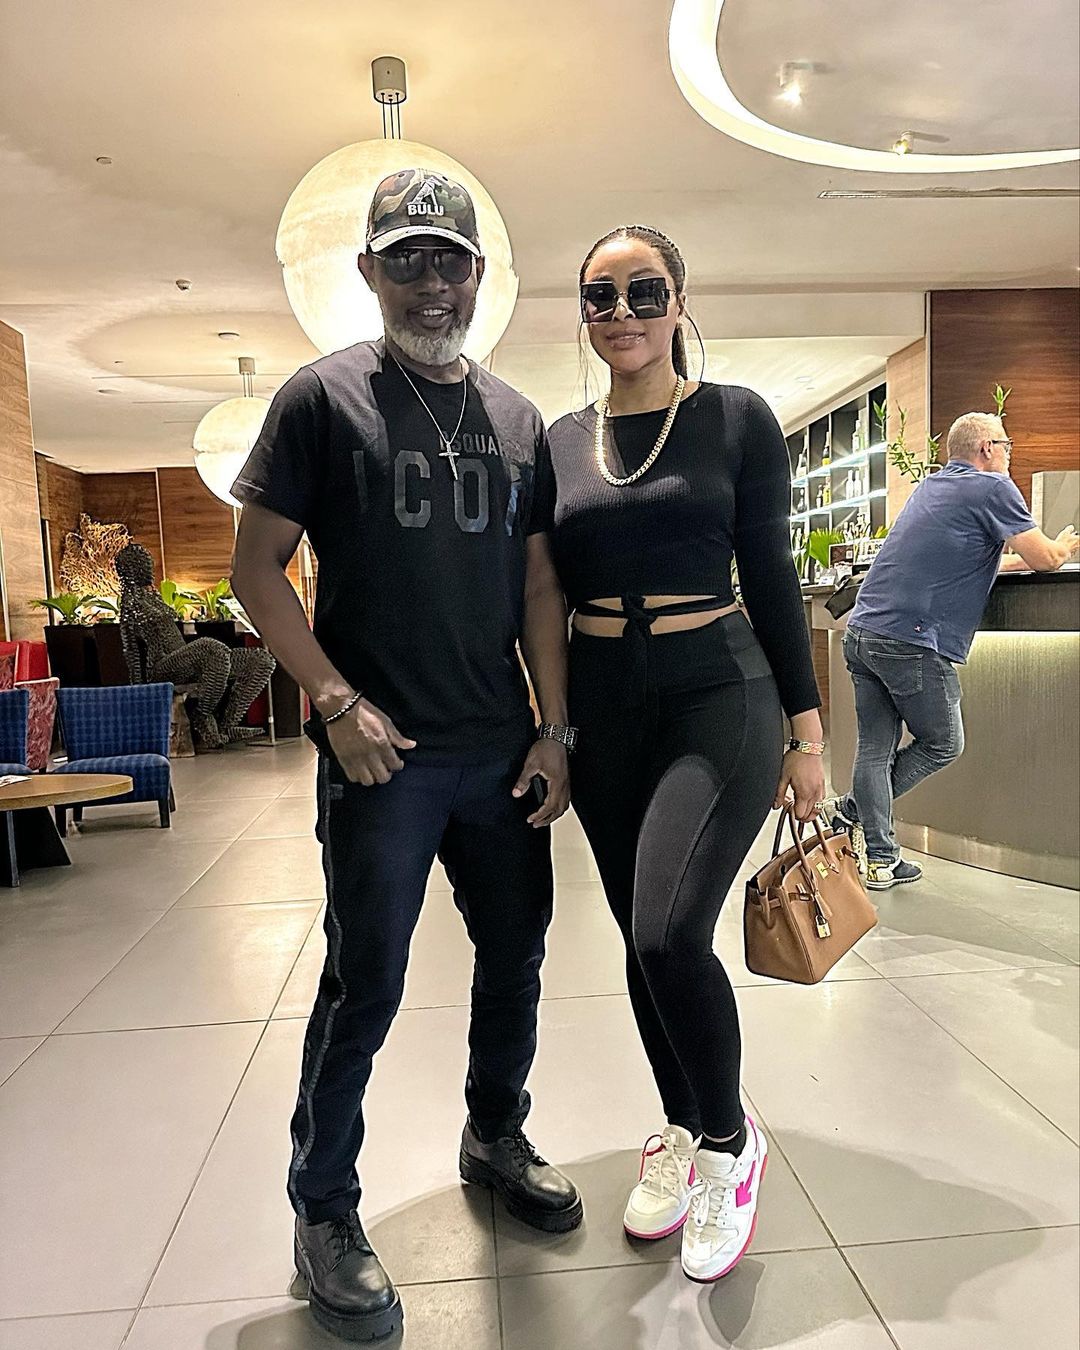 "The way young people disrespect elders these days" – Mabel Makun slams those dragging her husband over joke about Davido 